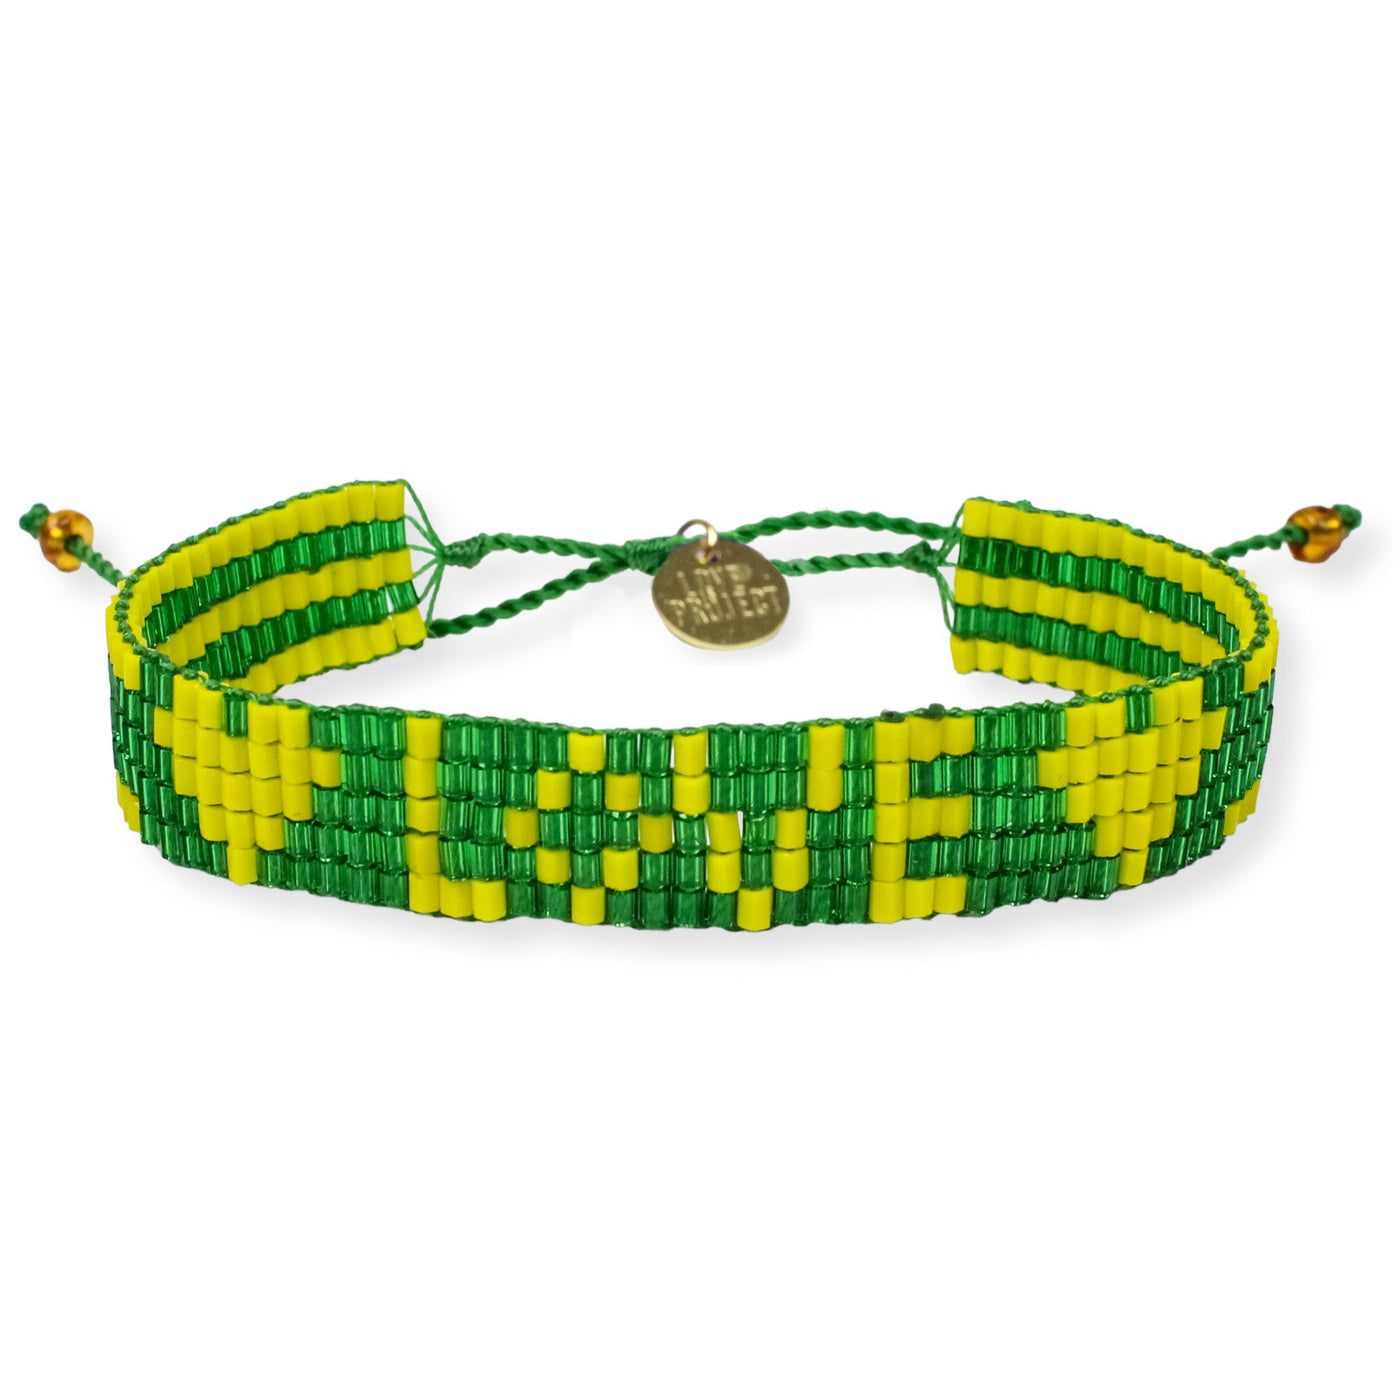 Seed Bead LOVE with Hearts Bracelet - Green and Yellow